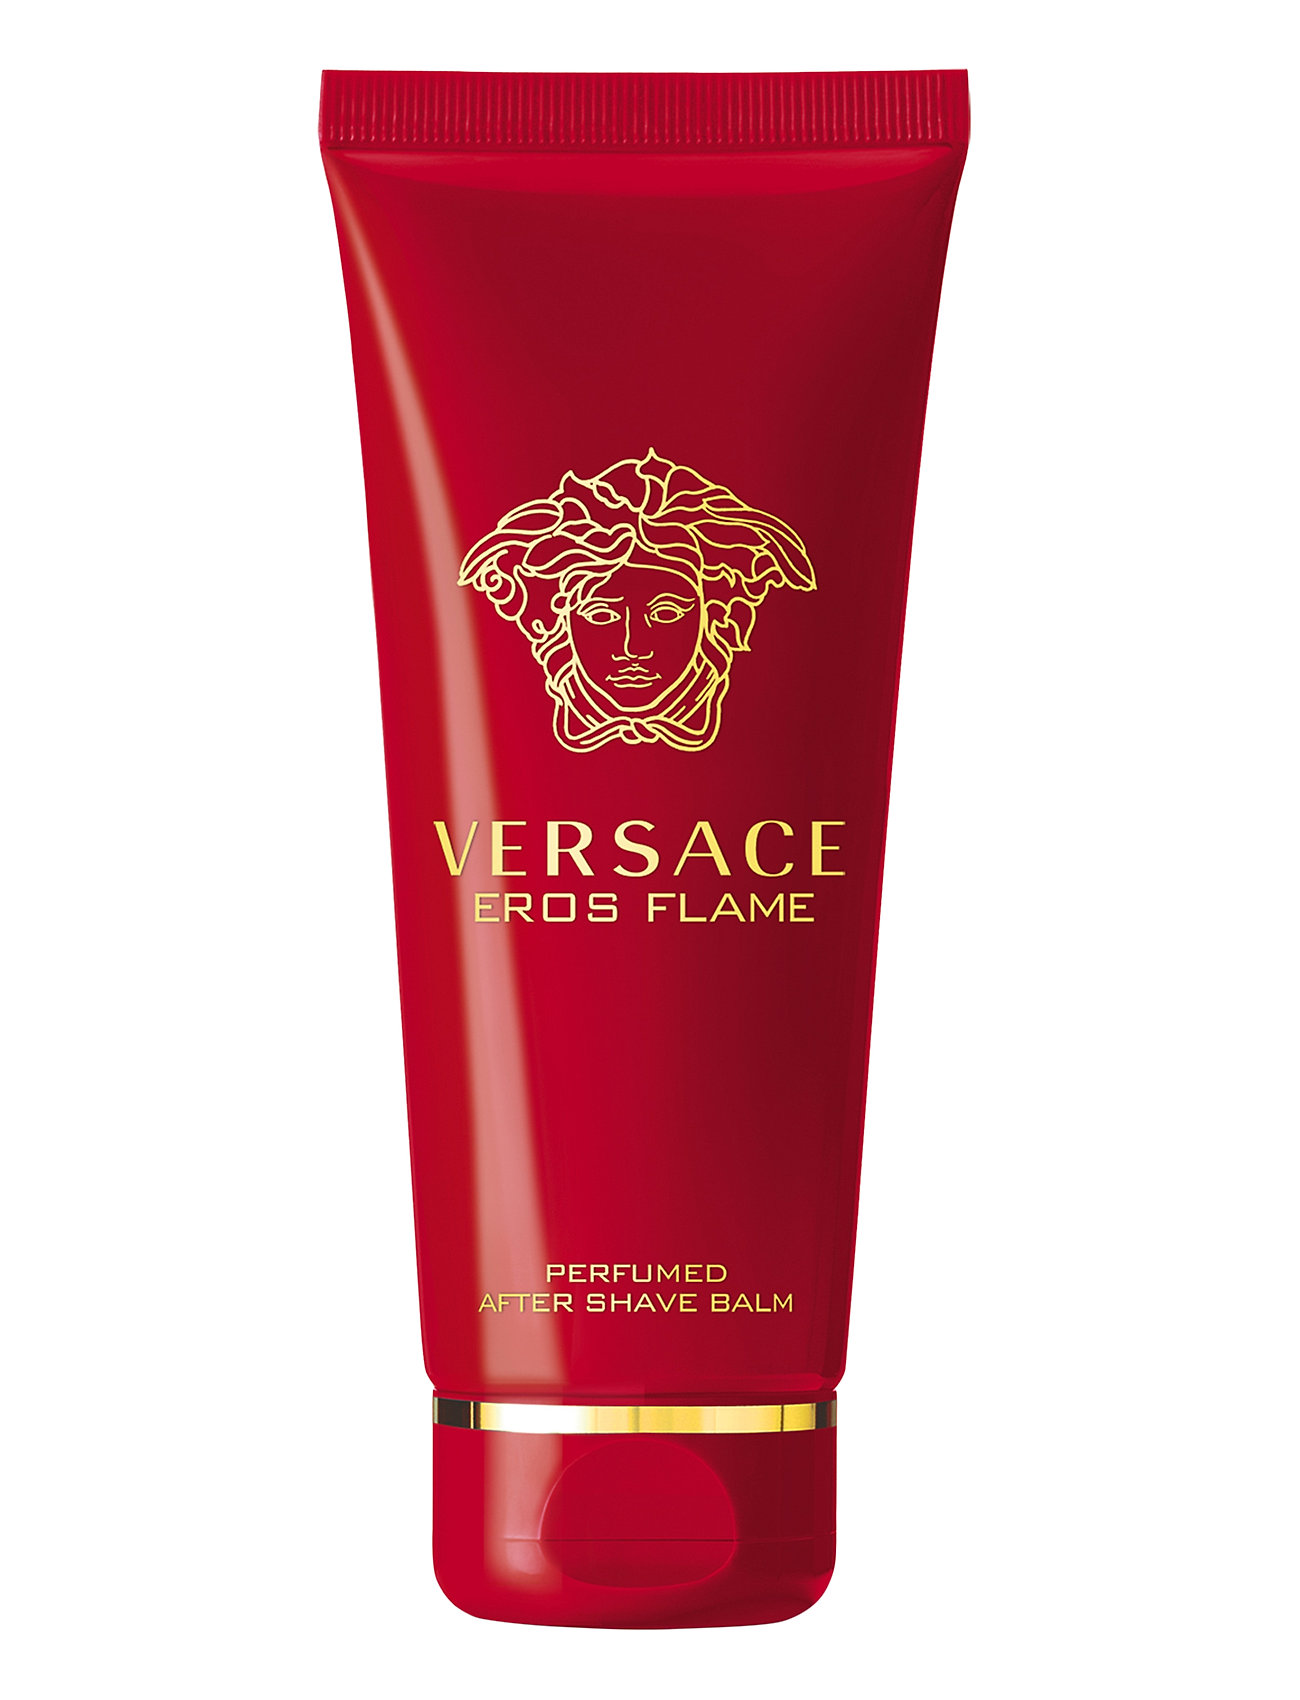 Versace Eros Flame Pour Homme After Shave Balm 100ml Beauty MEN Shaving Products After Shave Nude Versace Fragrance